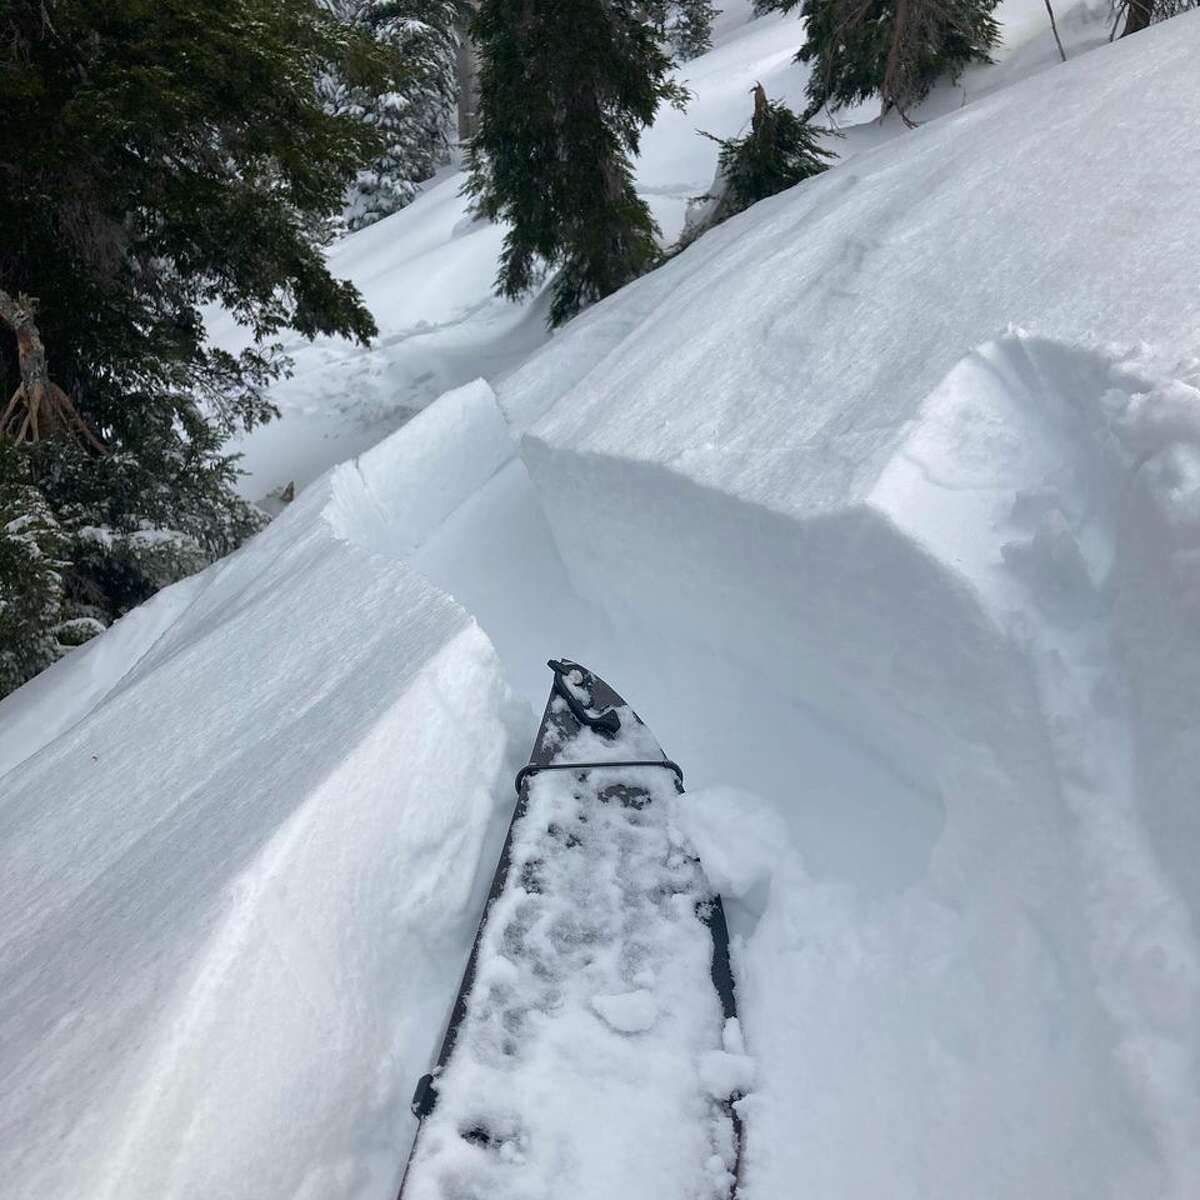 Avalanche conditions were unstable in the Tahoe region over the holiday weekend.